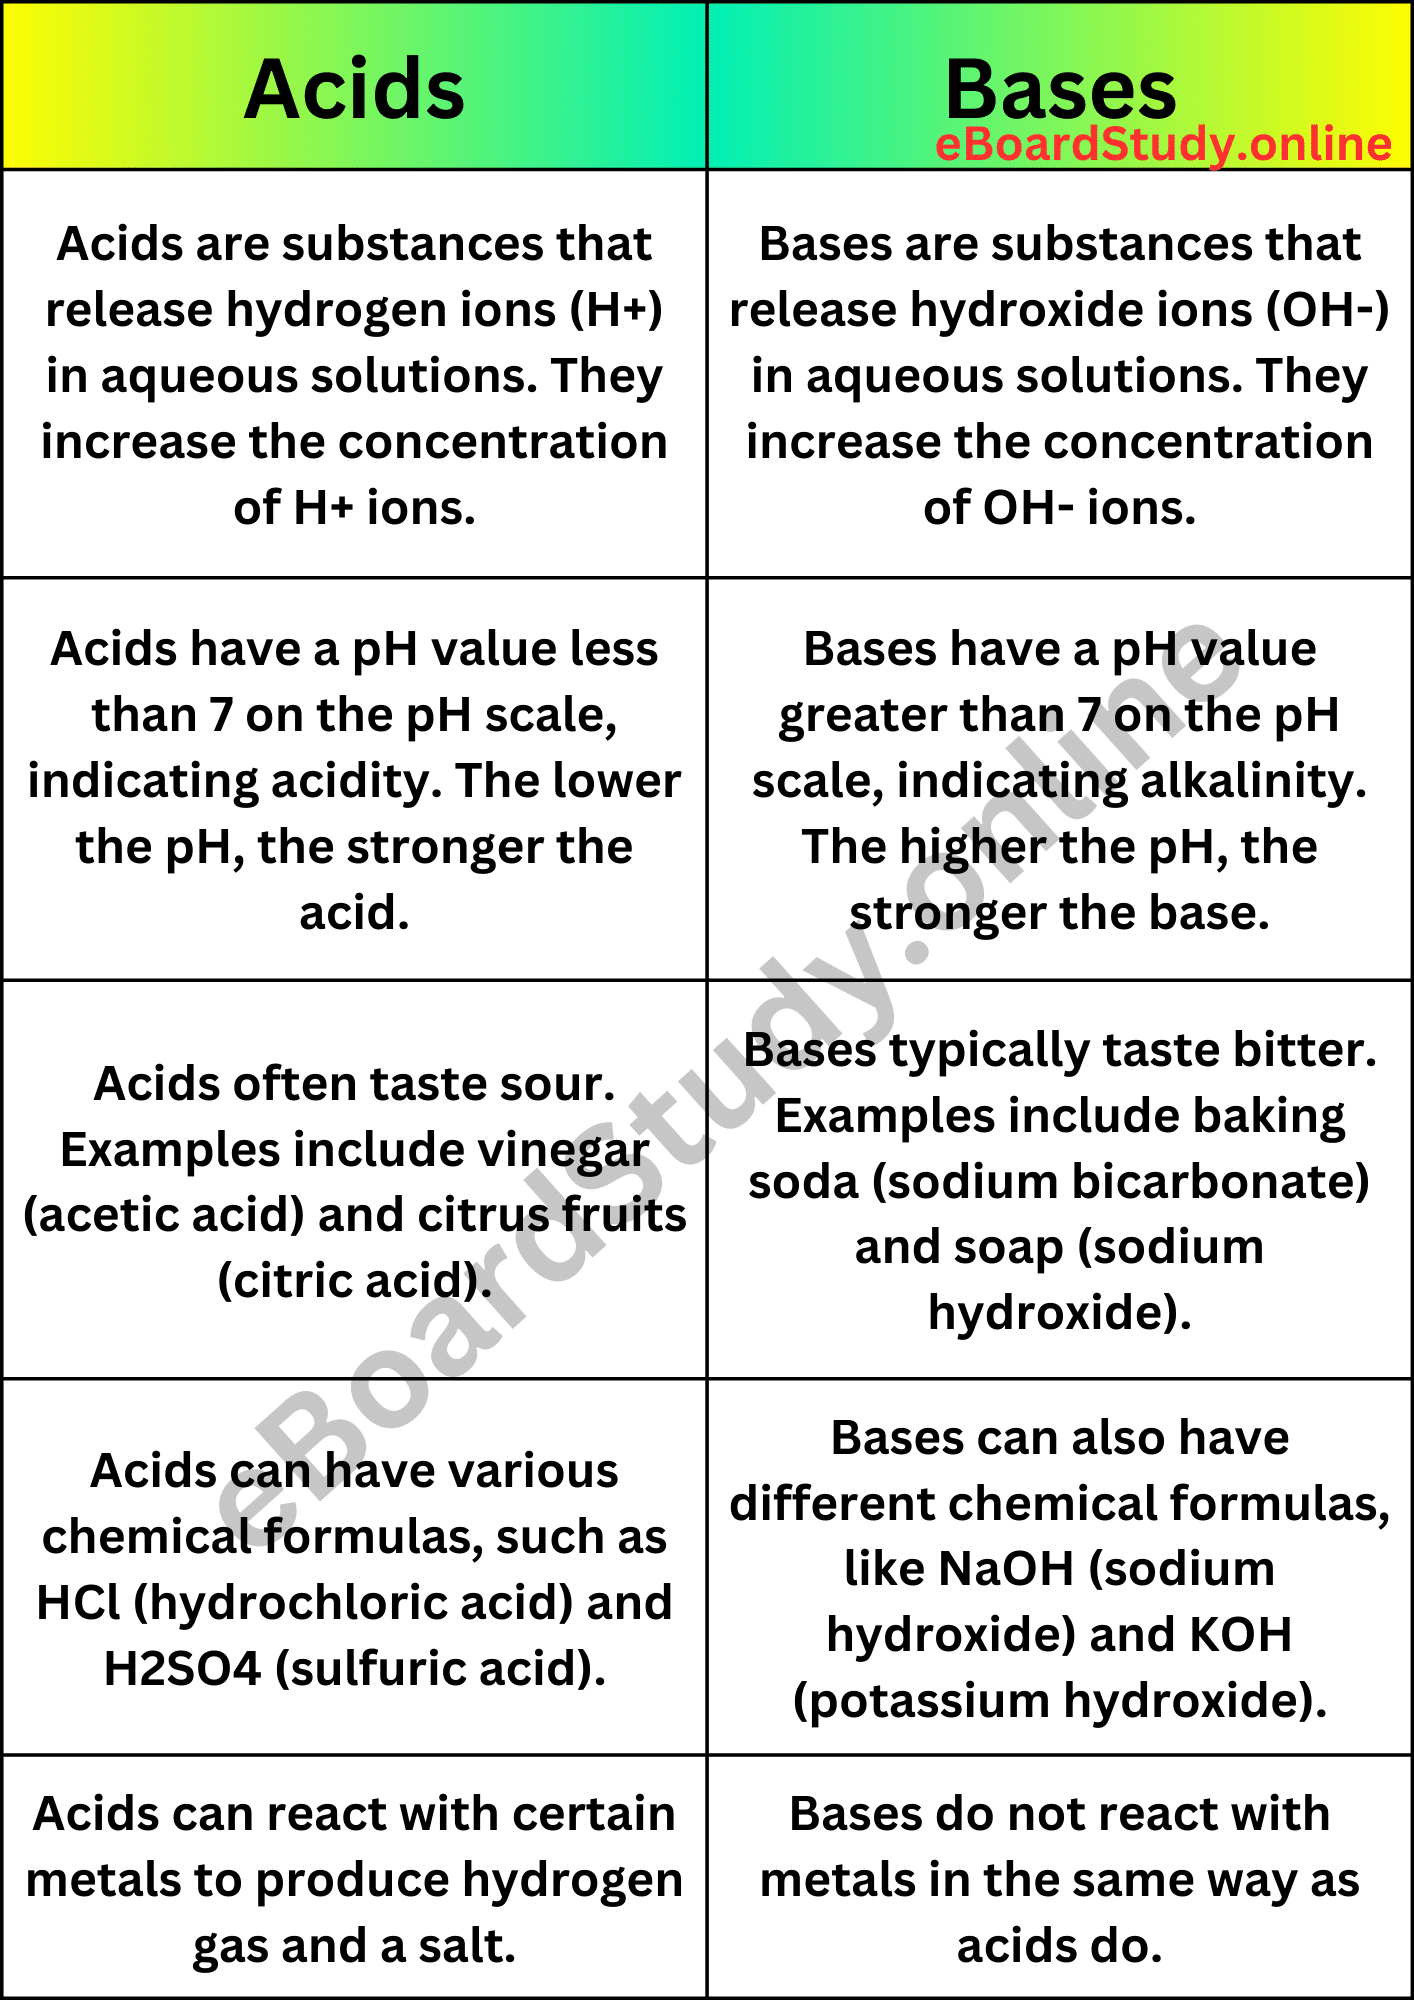 Difference between Acids and Bases comparison table